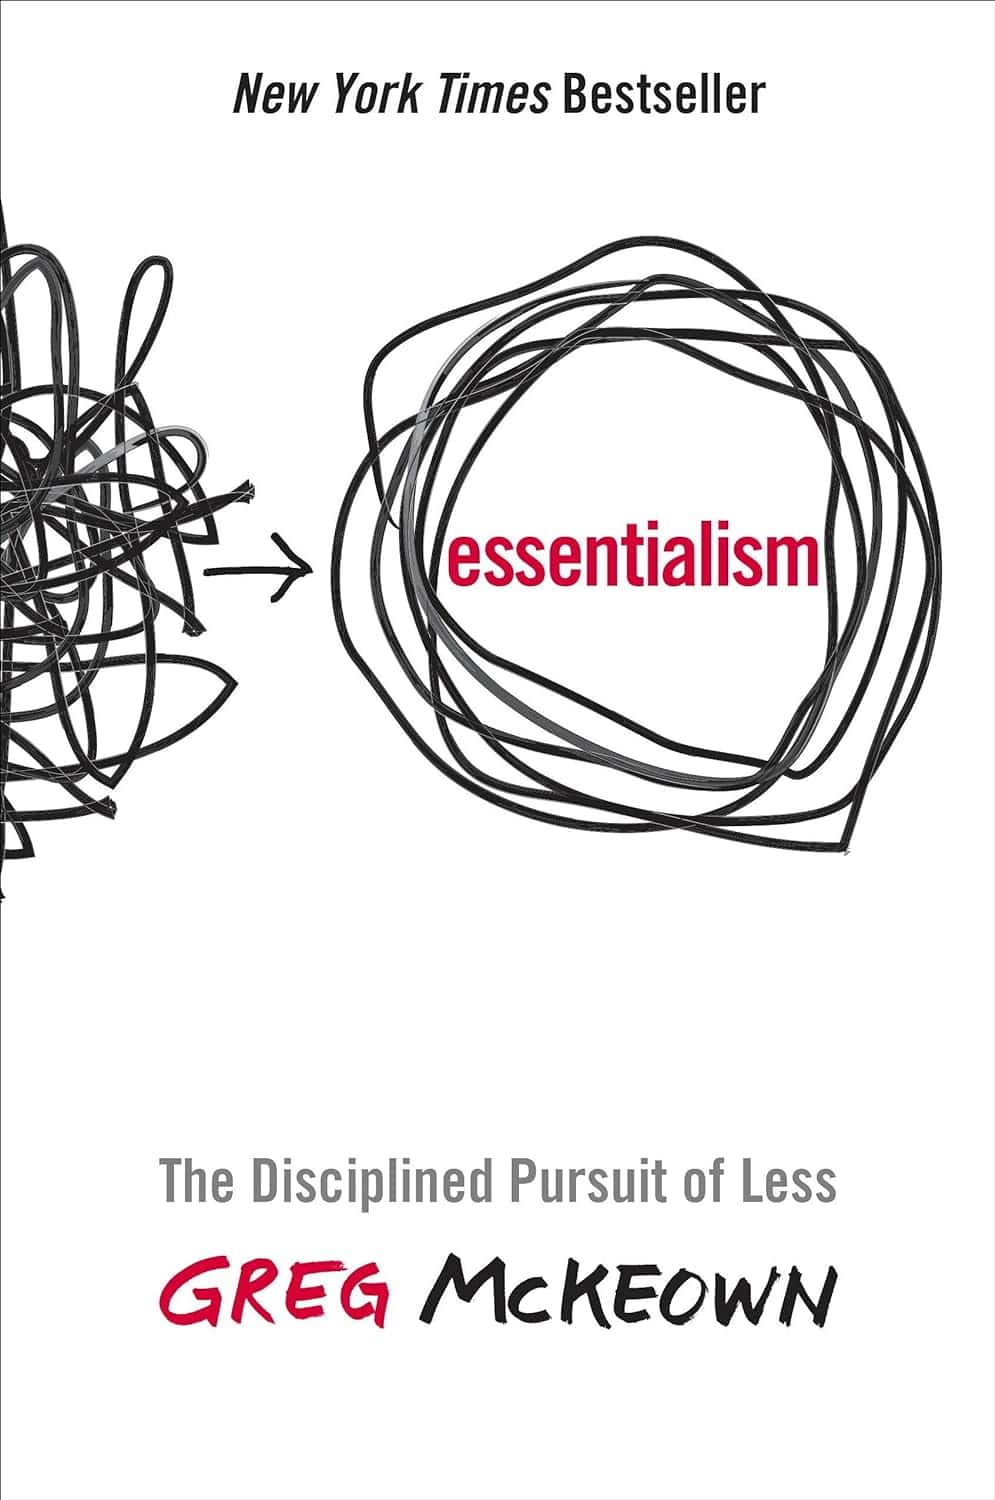 Essentialism The Disciplined Pursuit of Less by Greg McKeown